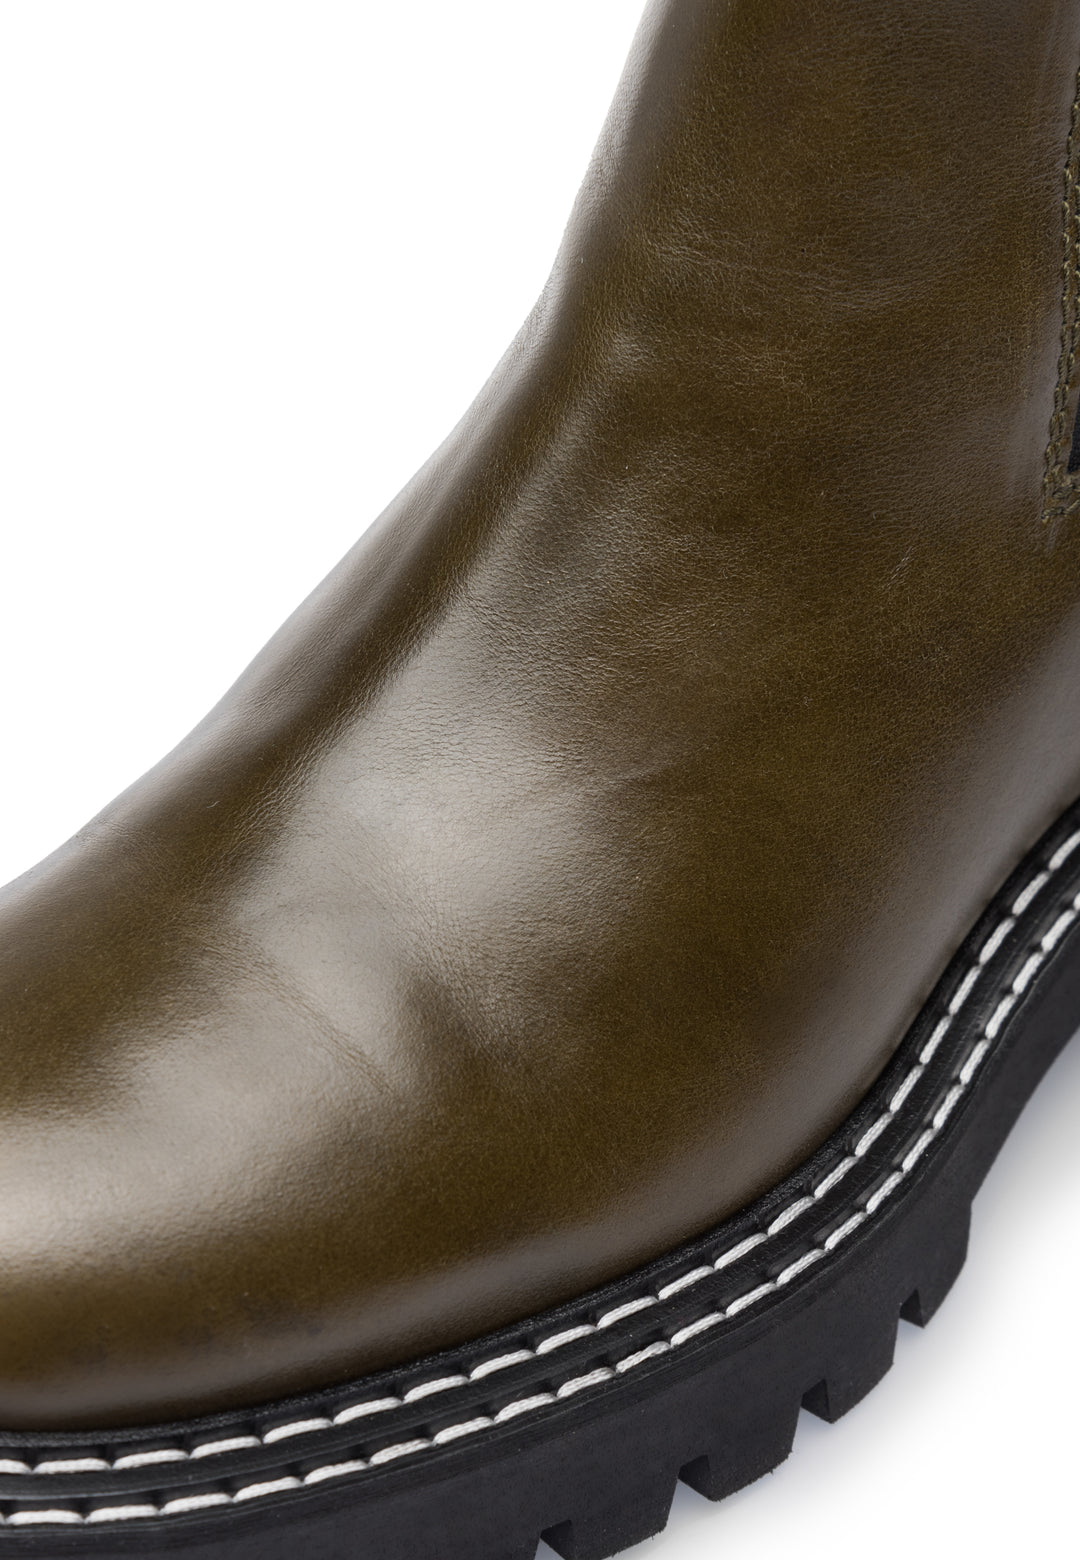 LÄST Angie Chelsea - Leather - Olive Ankle Boots Olive